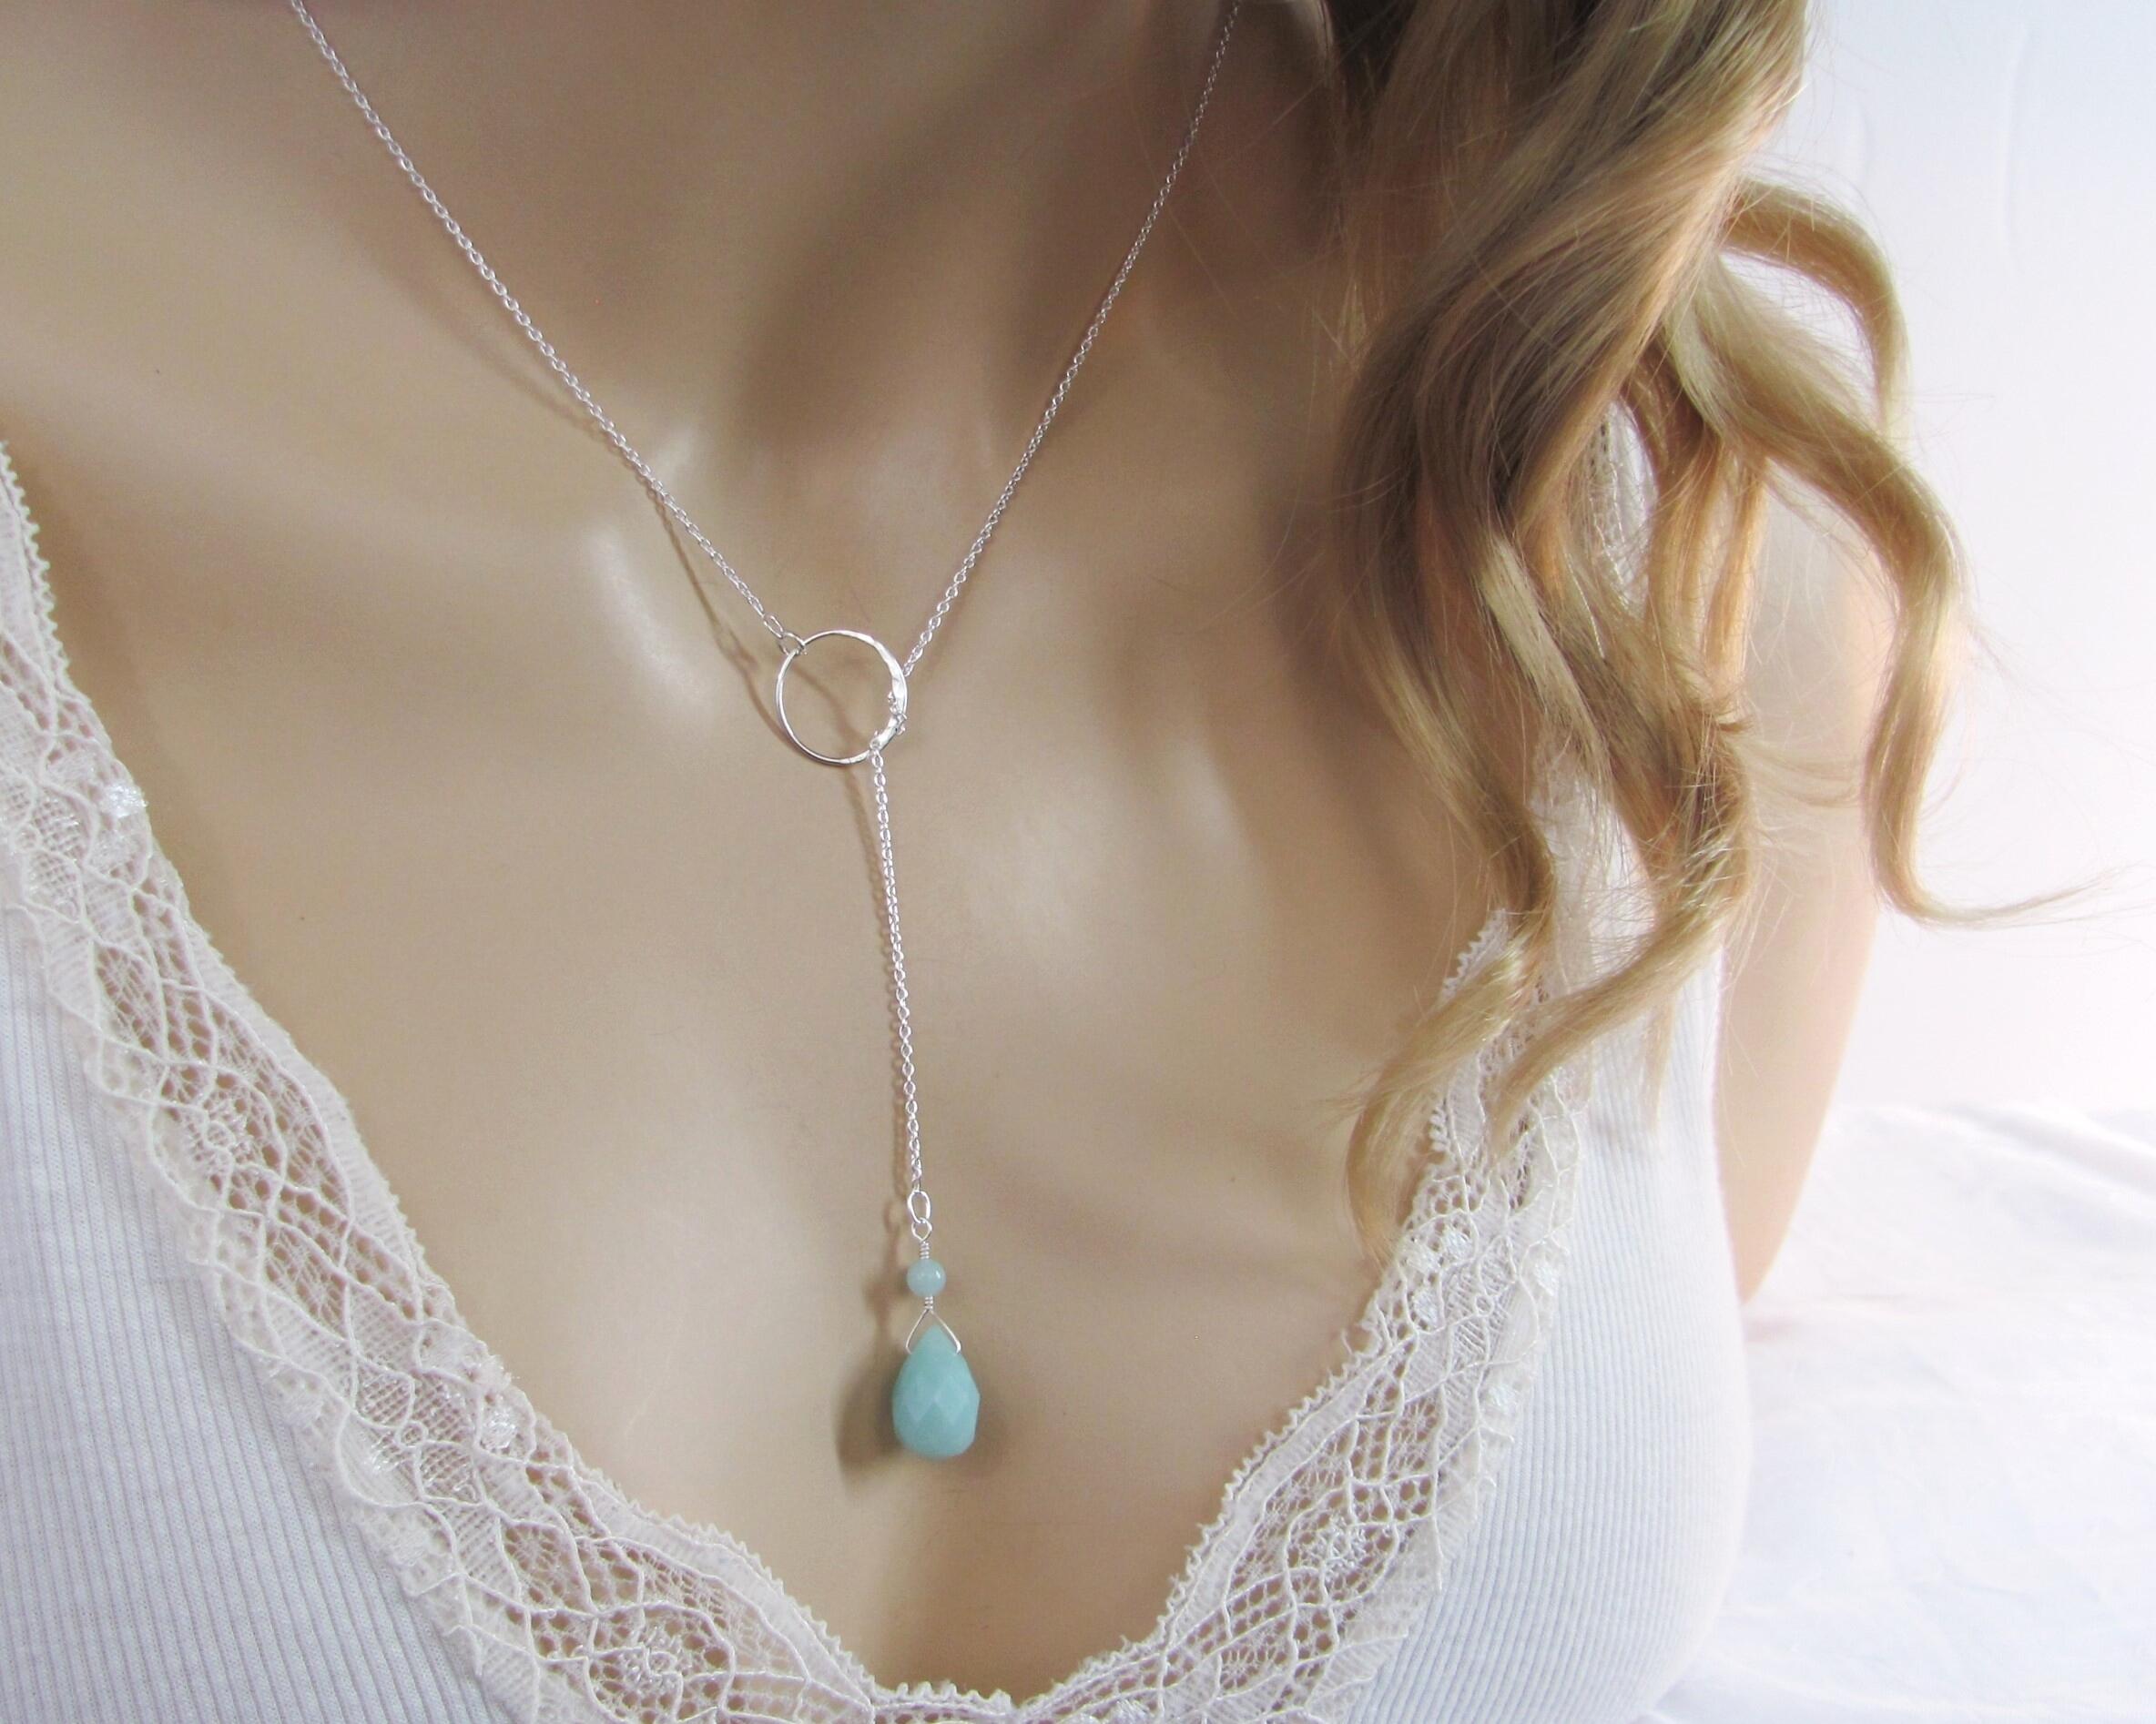 Amazonite Lariat Necklace in Sterling Silver